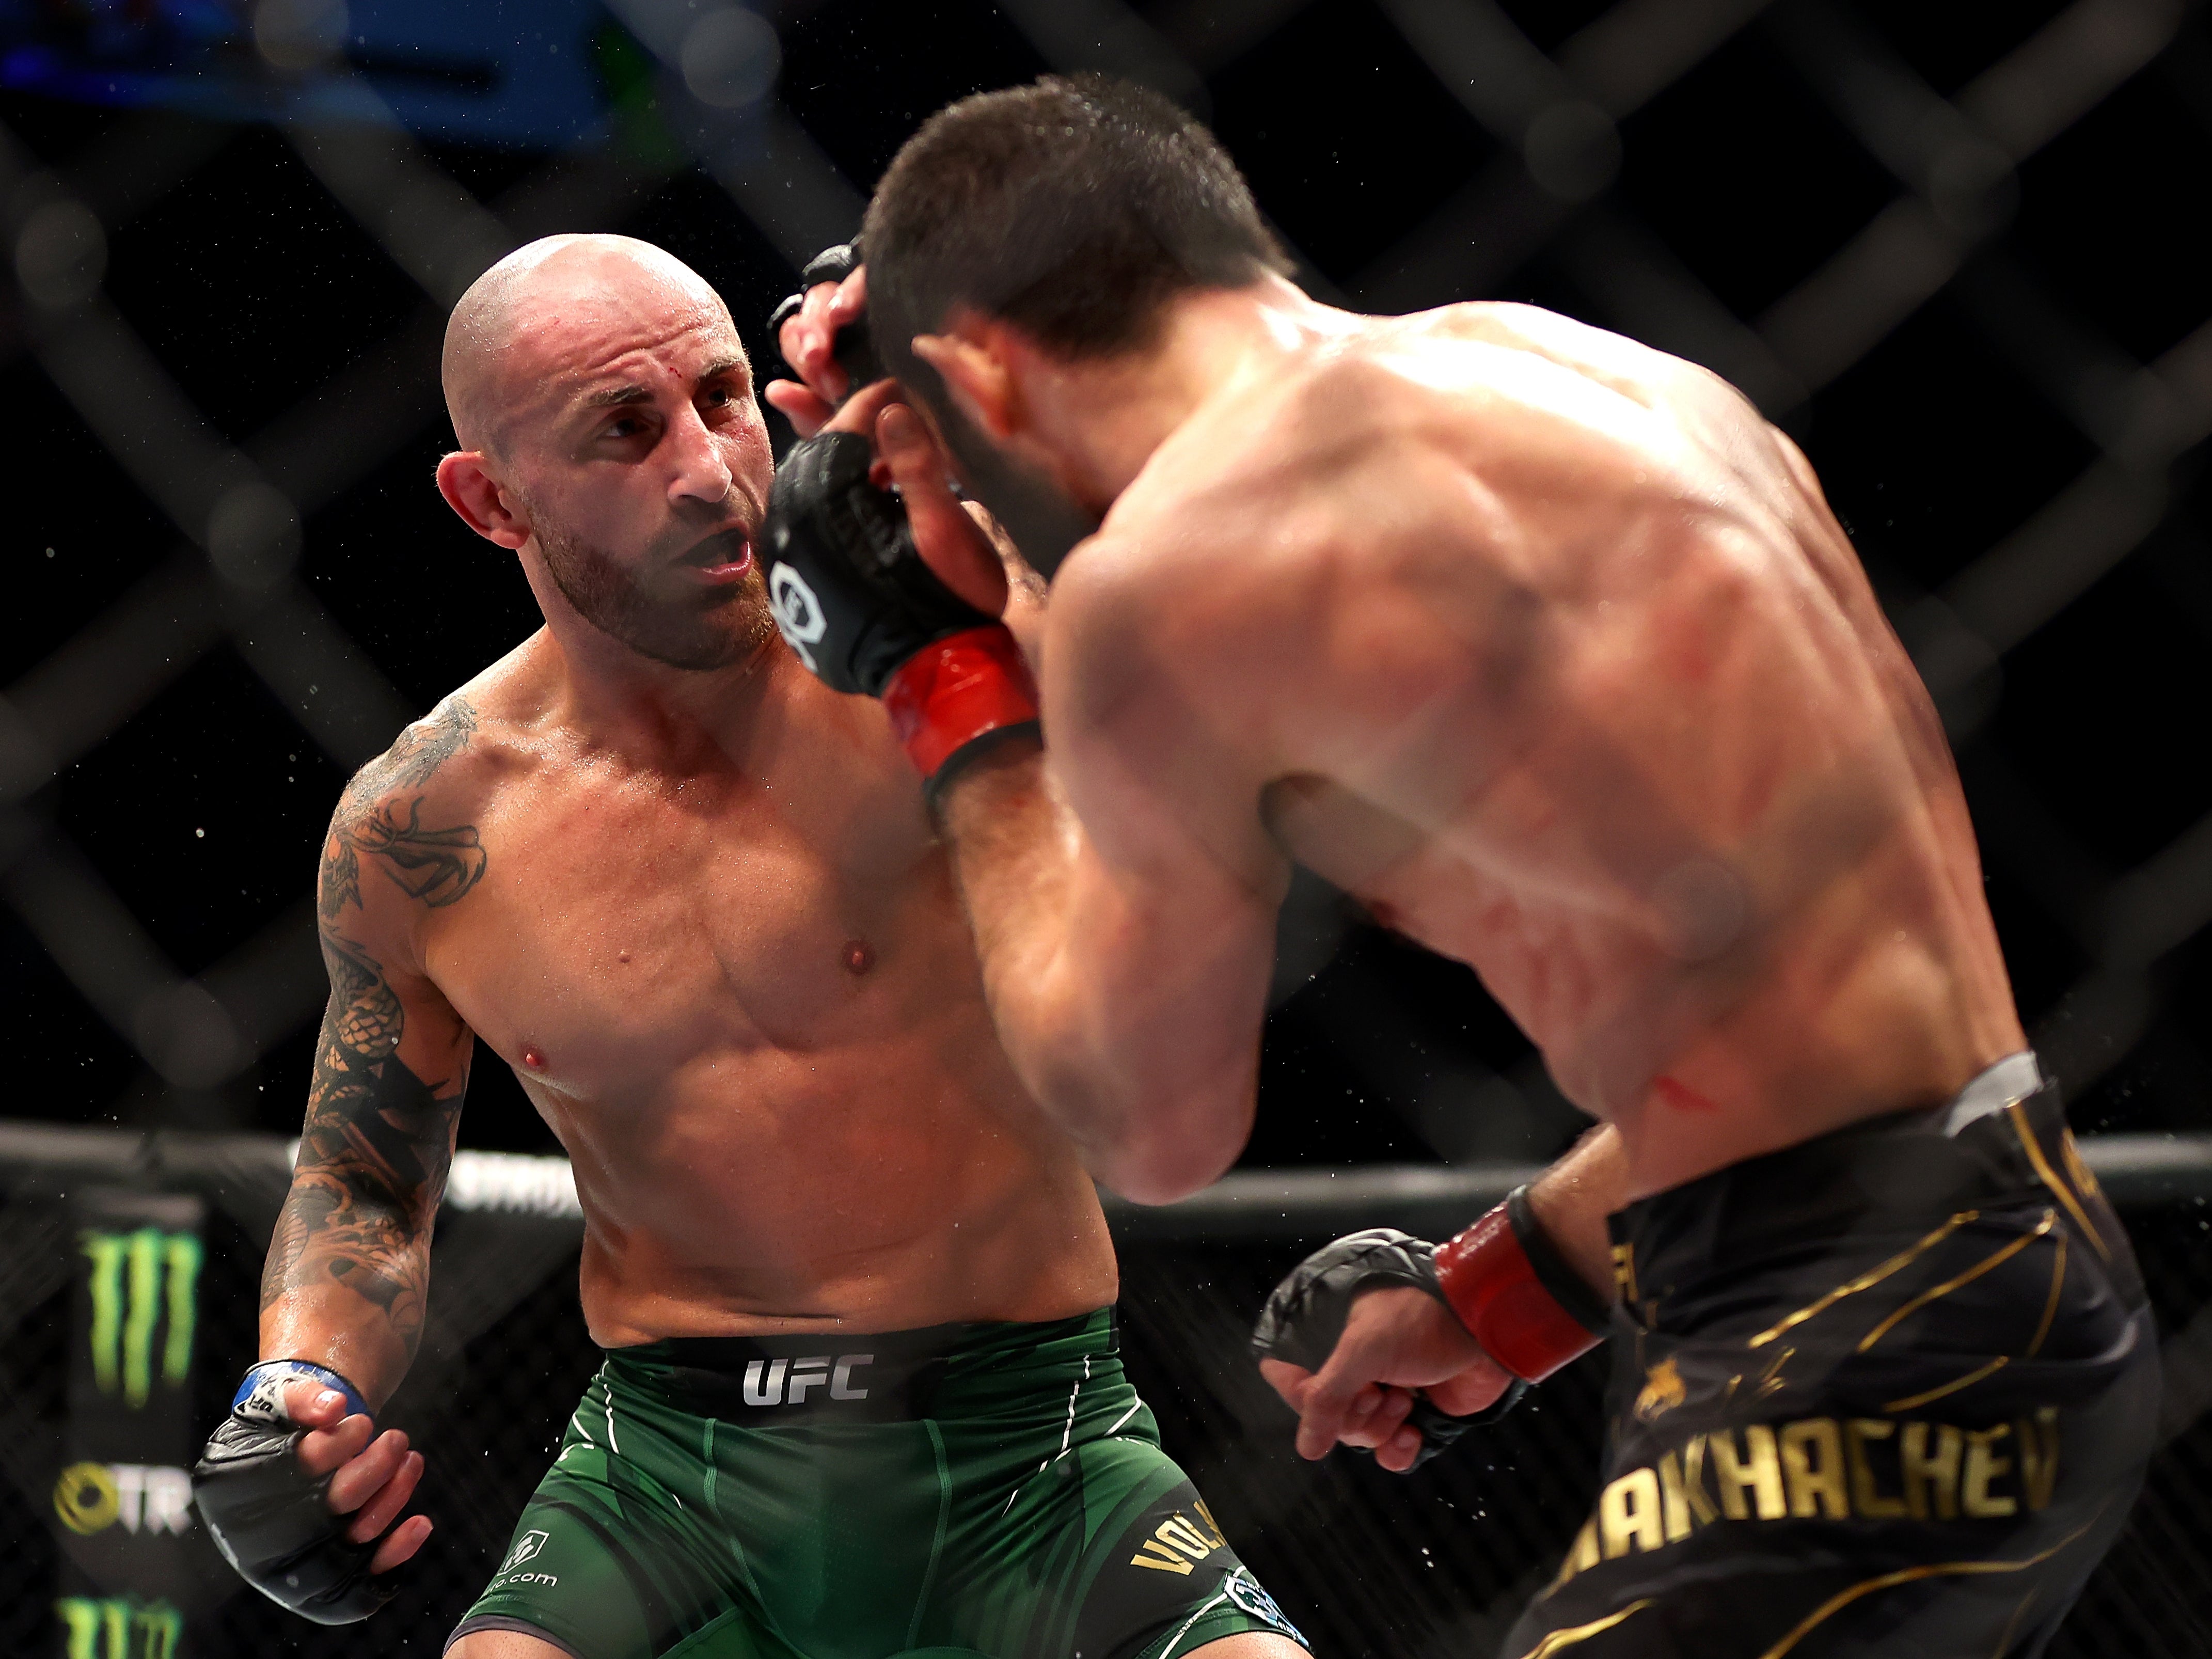 Volkanovski out-struck Makhachev, while the grappling statistics favoured the latter – as expected